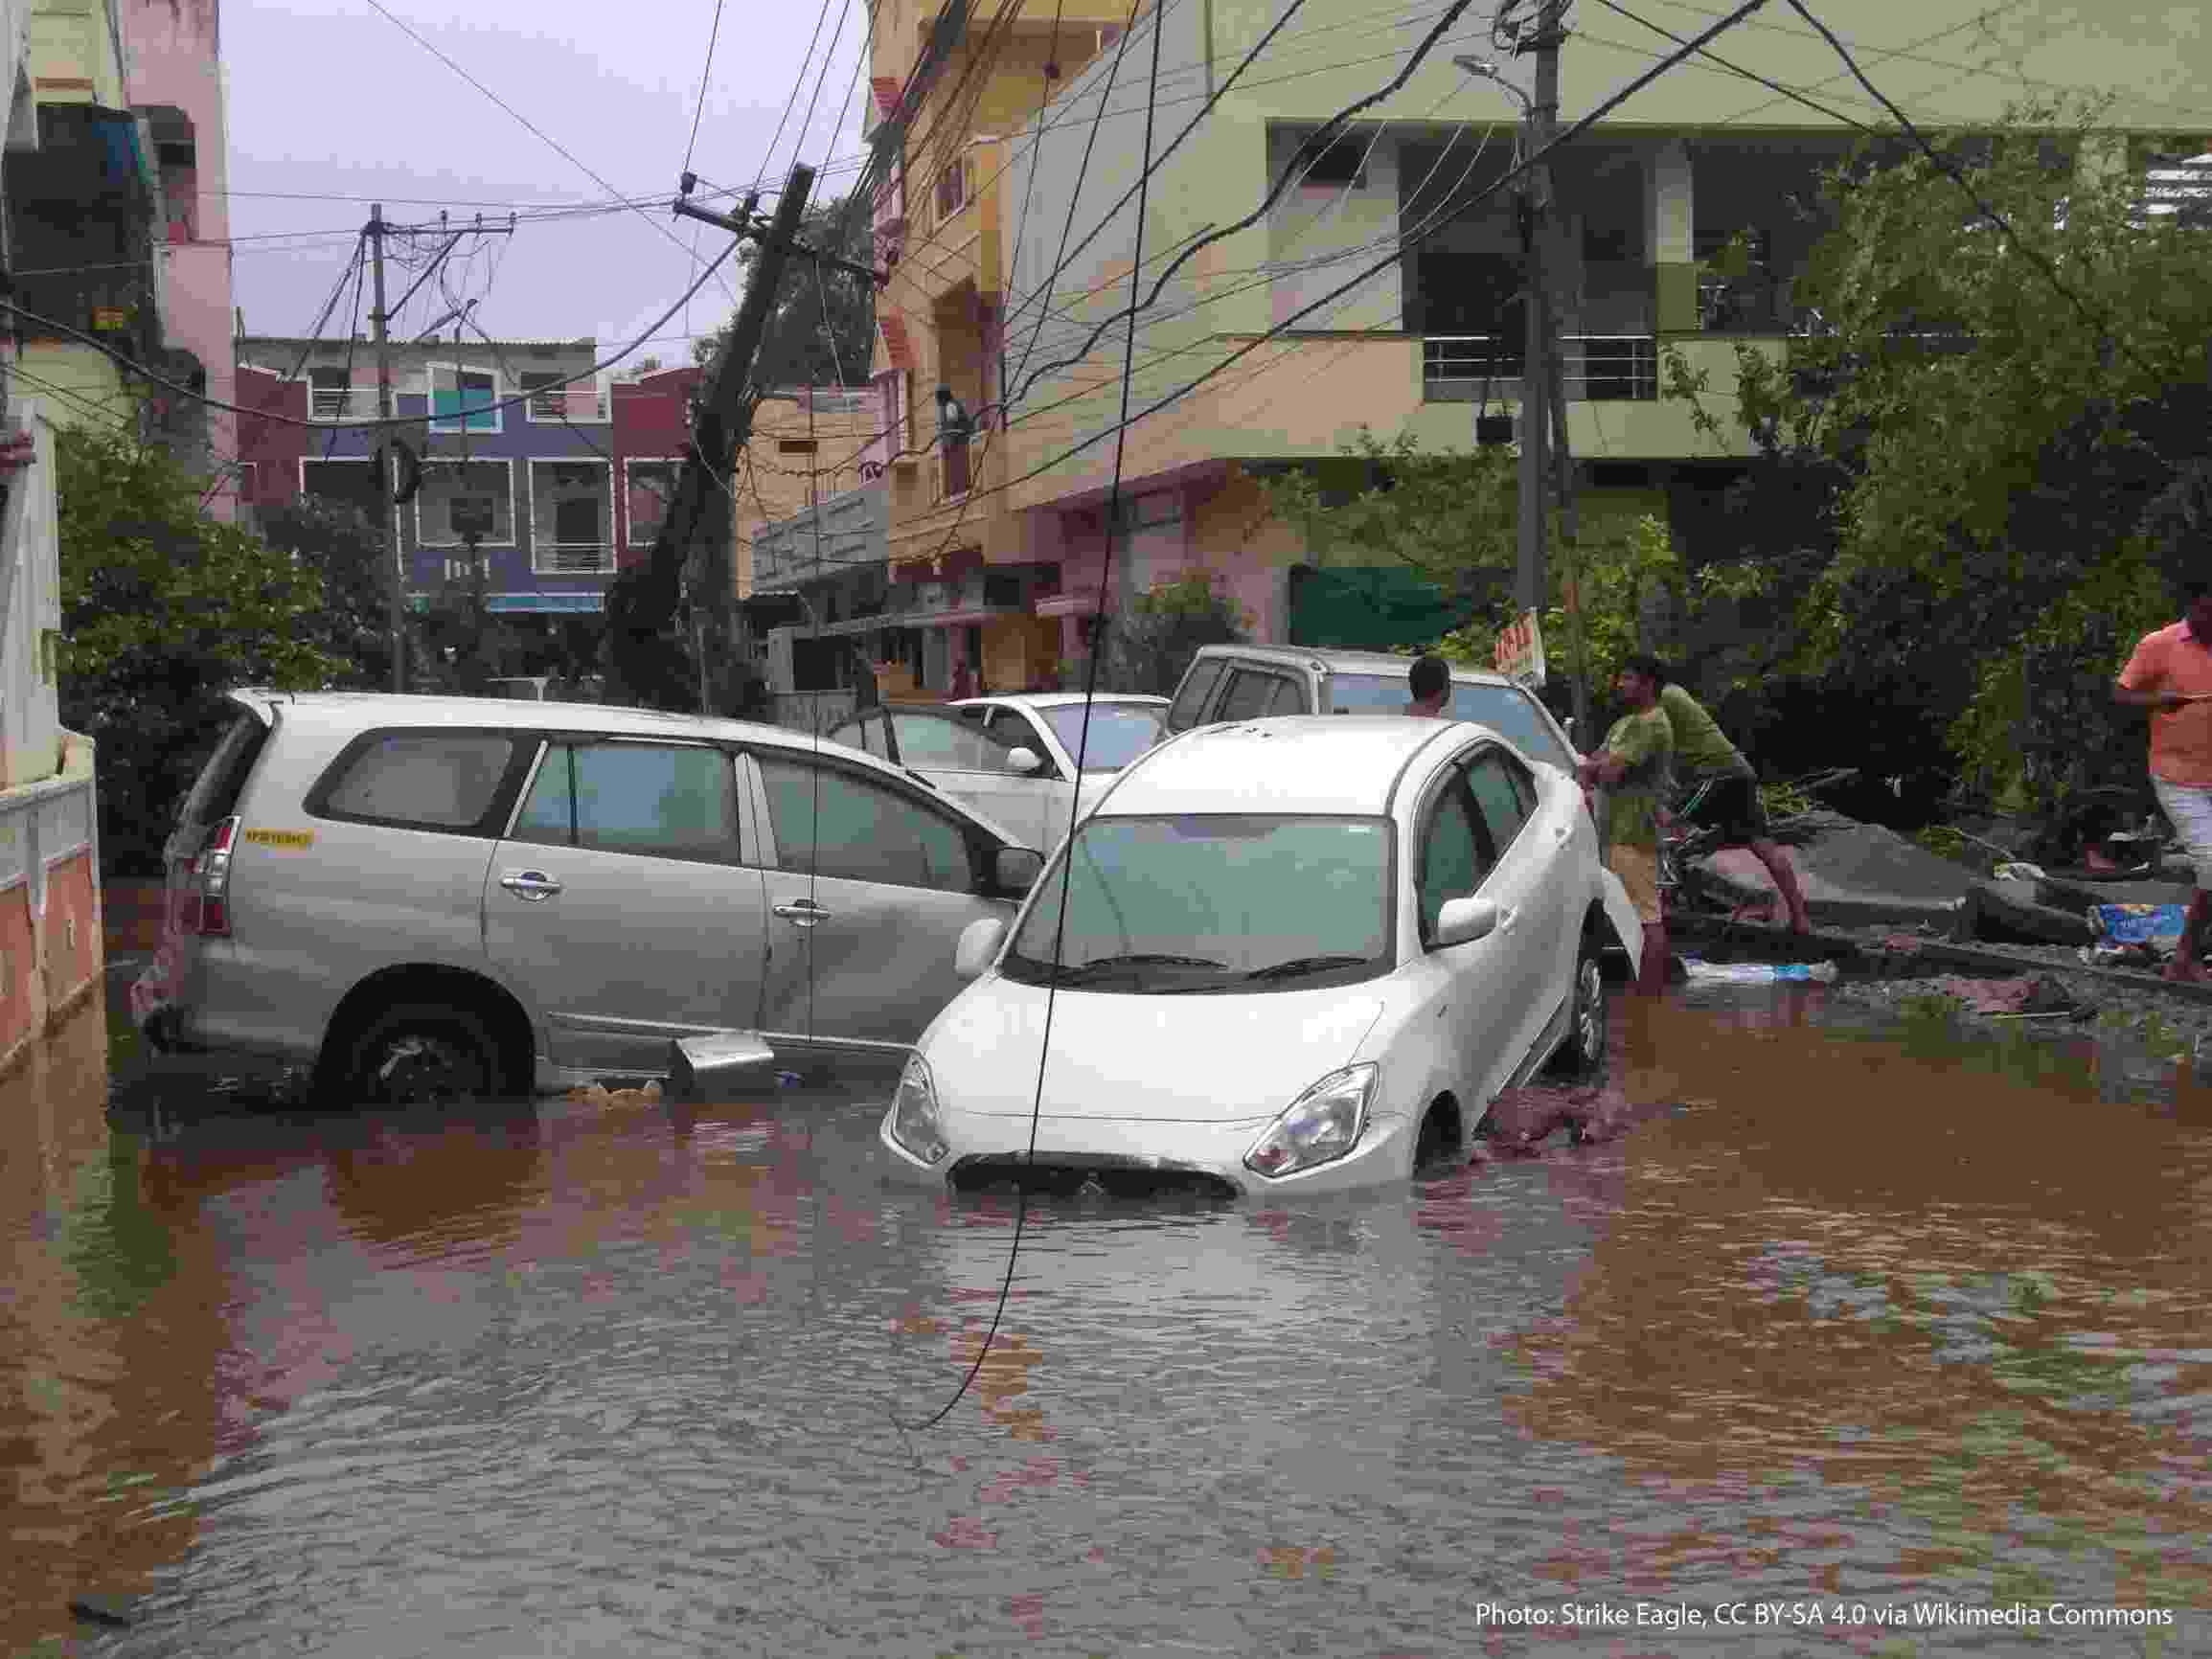 Several cars are partially submerged in flood waters in Hyderabad. The strength of the water has swept the cars down the street between houses, and damaged powerlines are visible behind